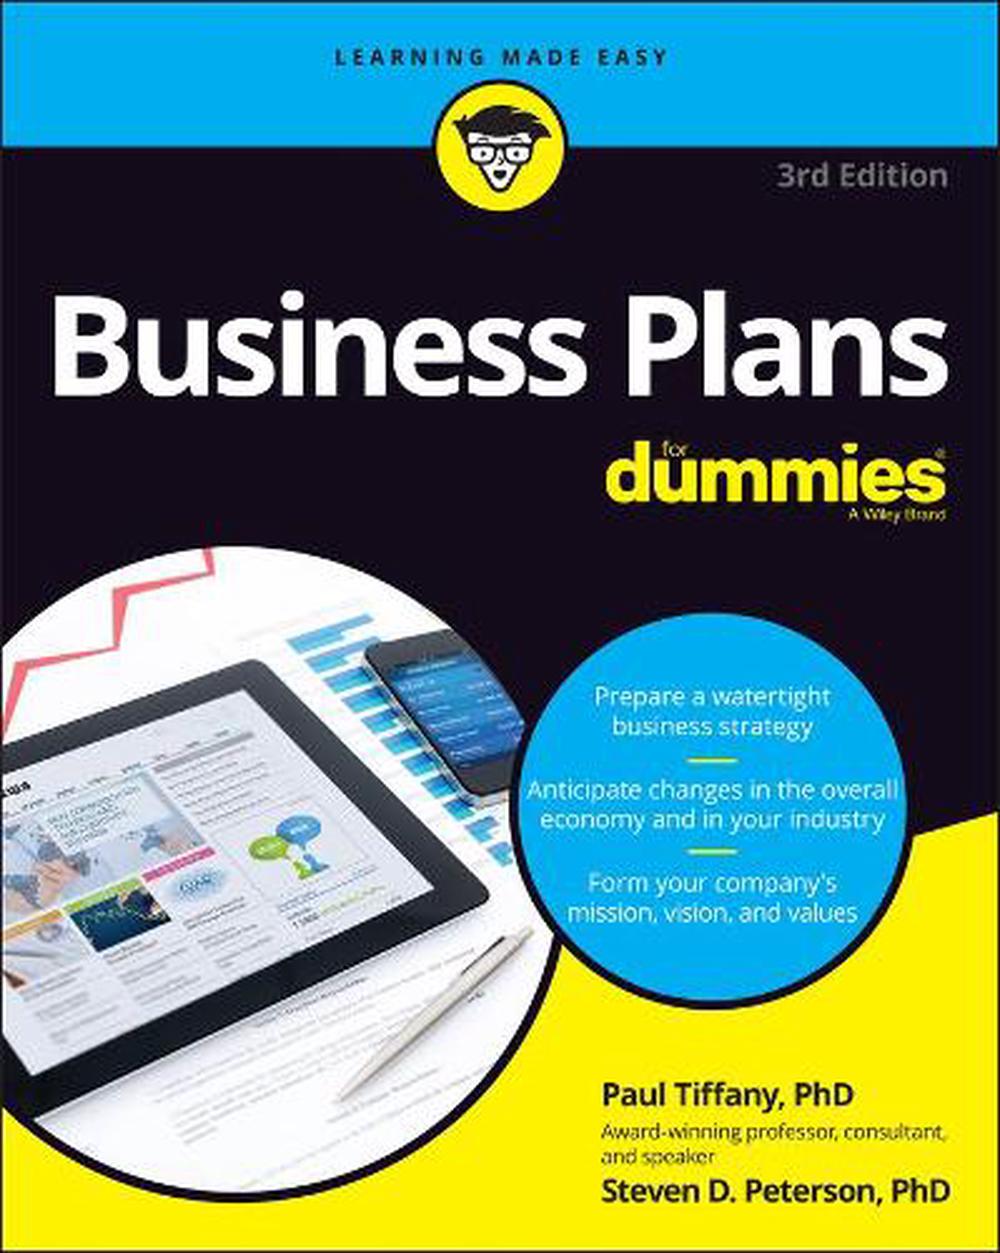 EBG　For　Paul　Tiffany　Plans　Paperback　by　Business　English　Dummies　Book